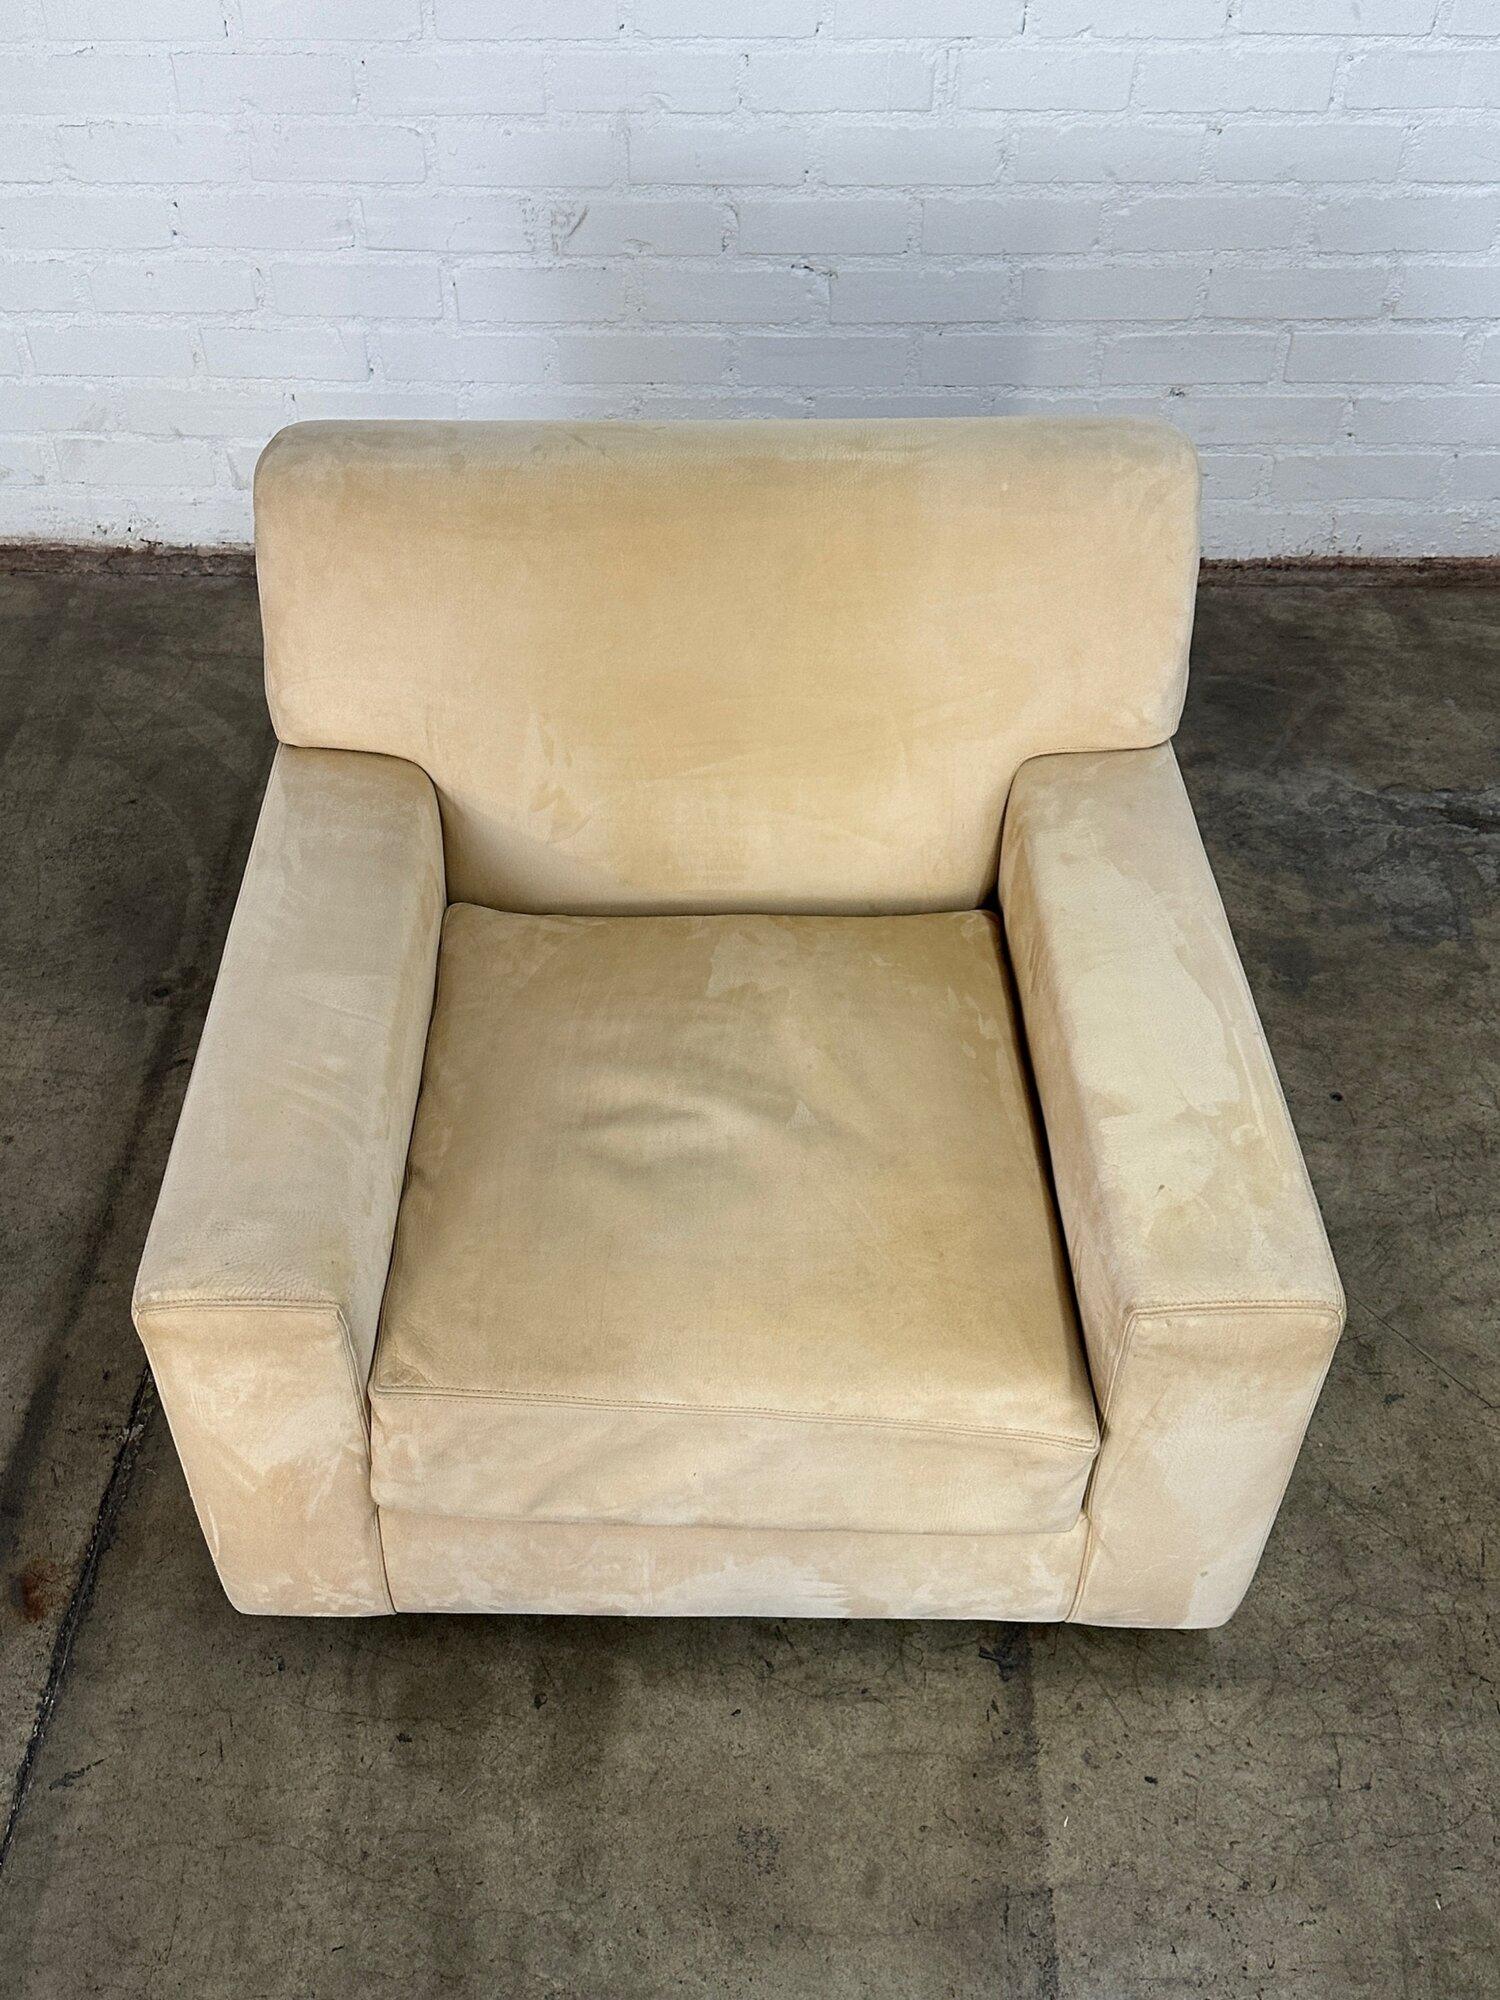 Vintage Swivel chair by Holly Hunt In Good Condition For Sale In Los Angeles, CA